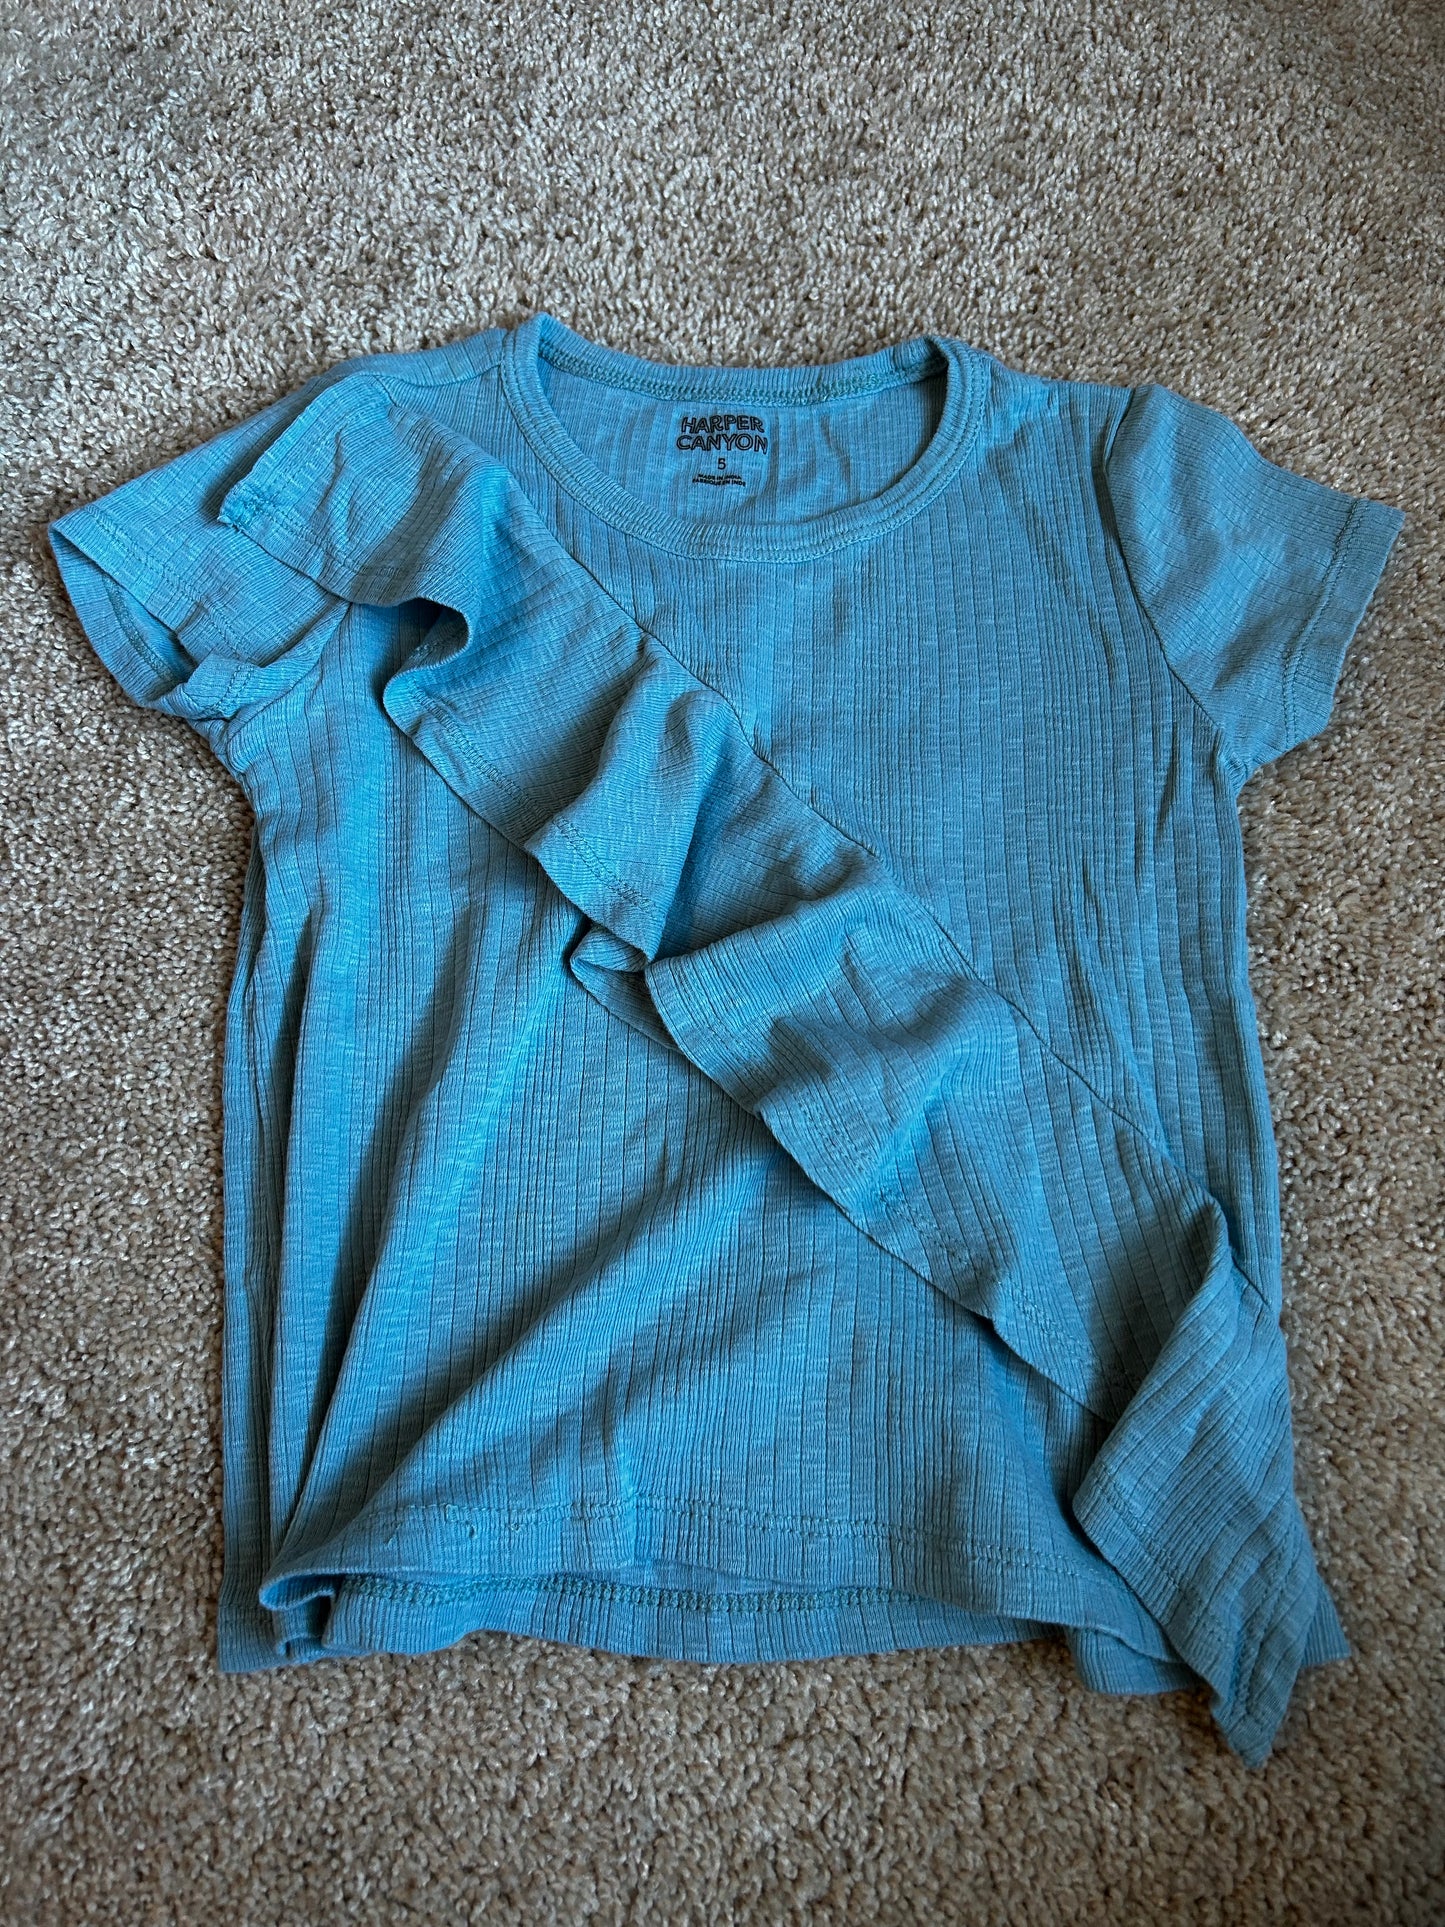 Harper Canyon girls top size 5 45247OR45212